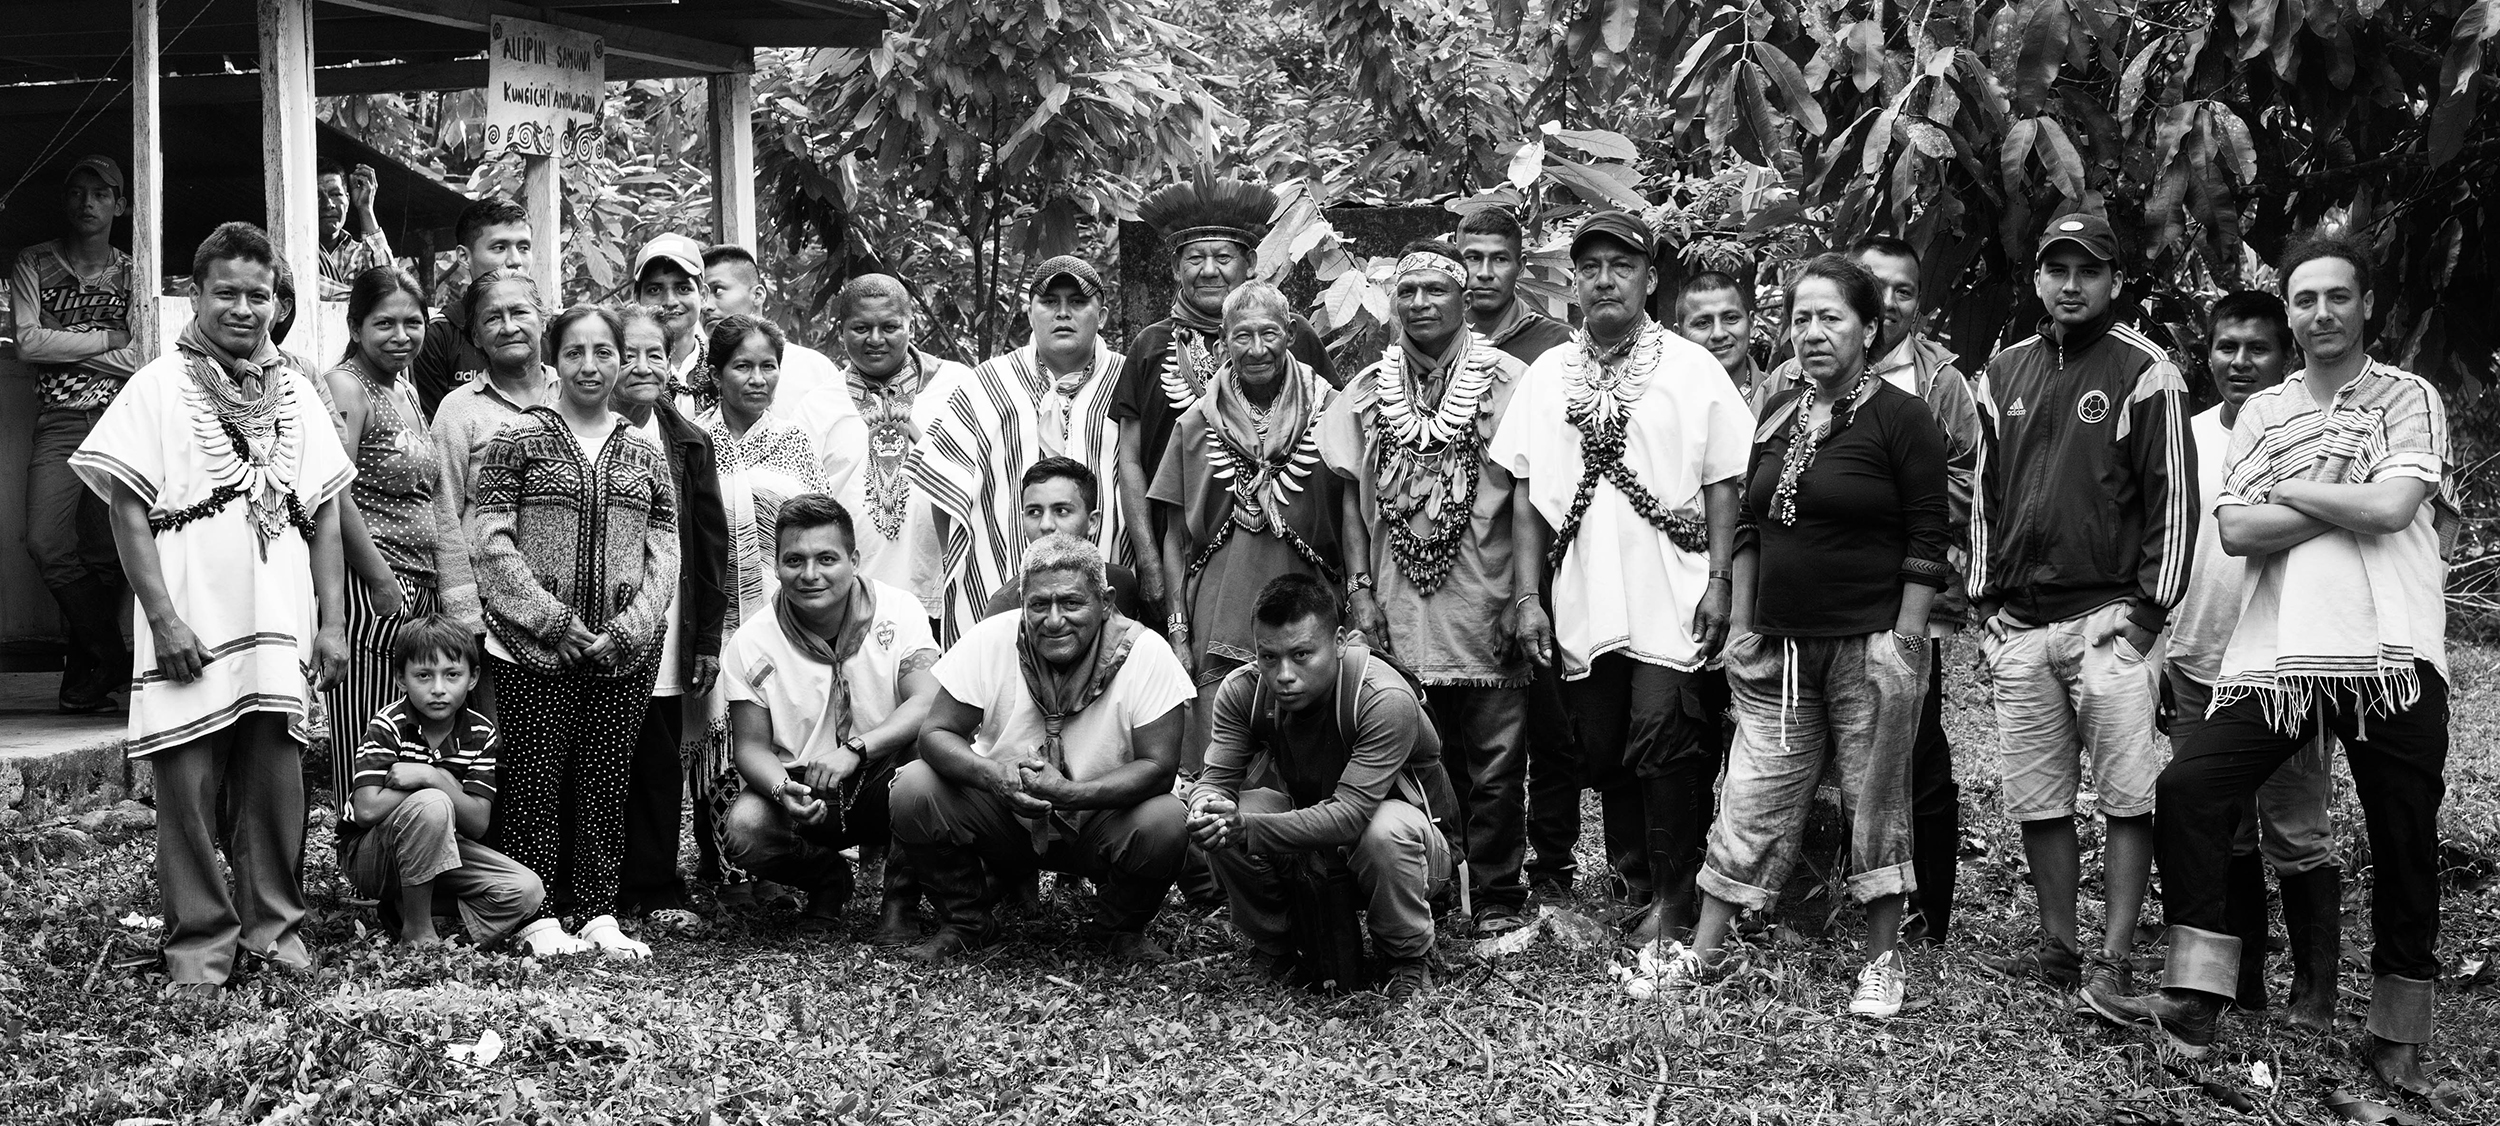 Members of the Inga Tandachiridu Inganokuna indigenous association with traditional healers from the Andes-Amazon transition region of Colombia